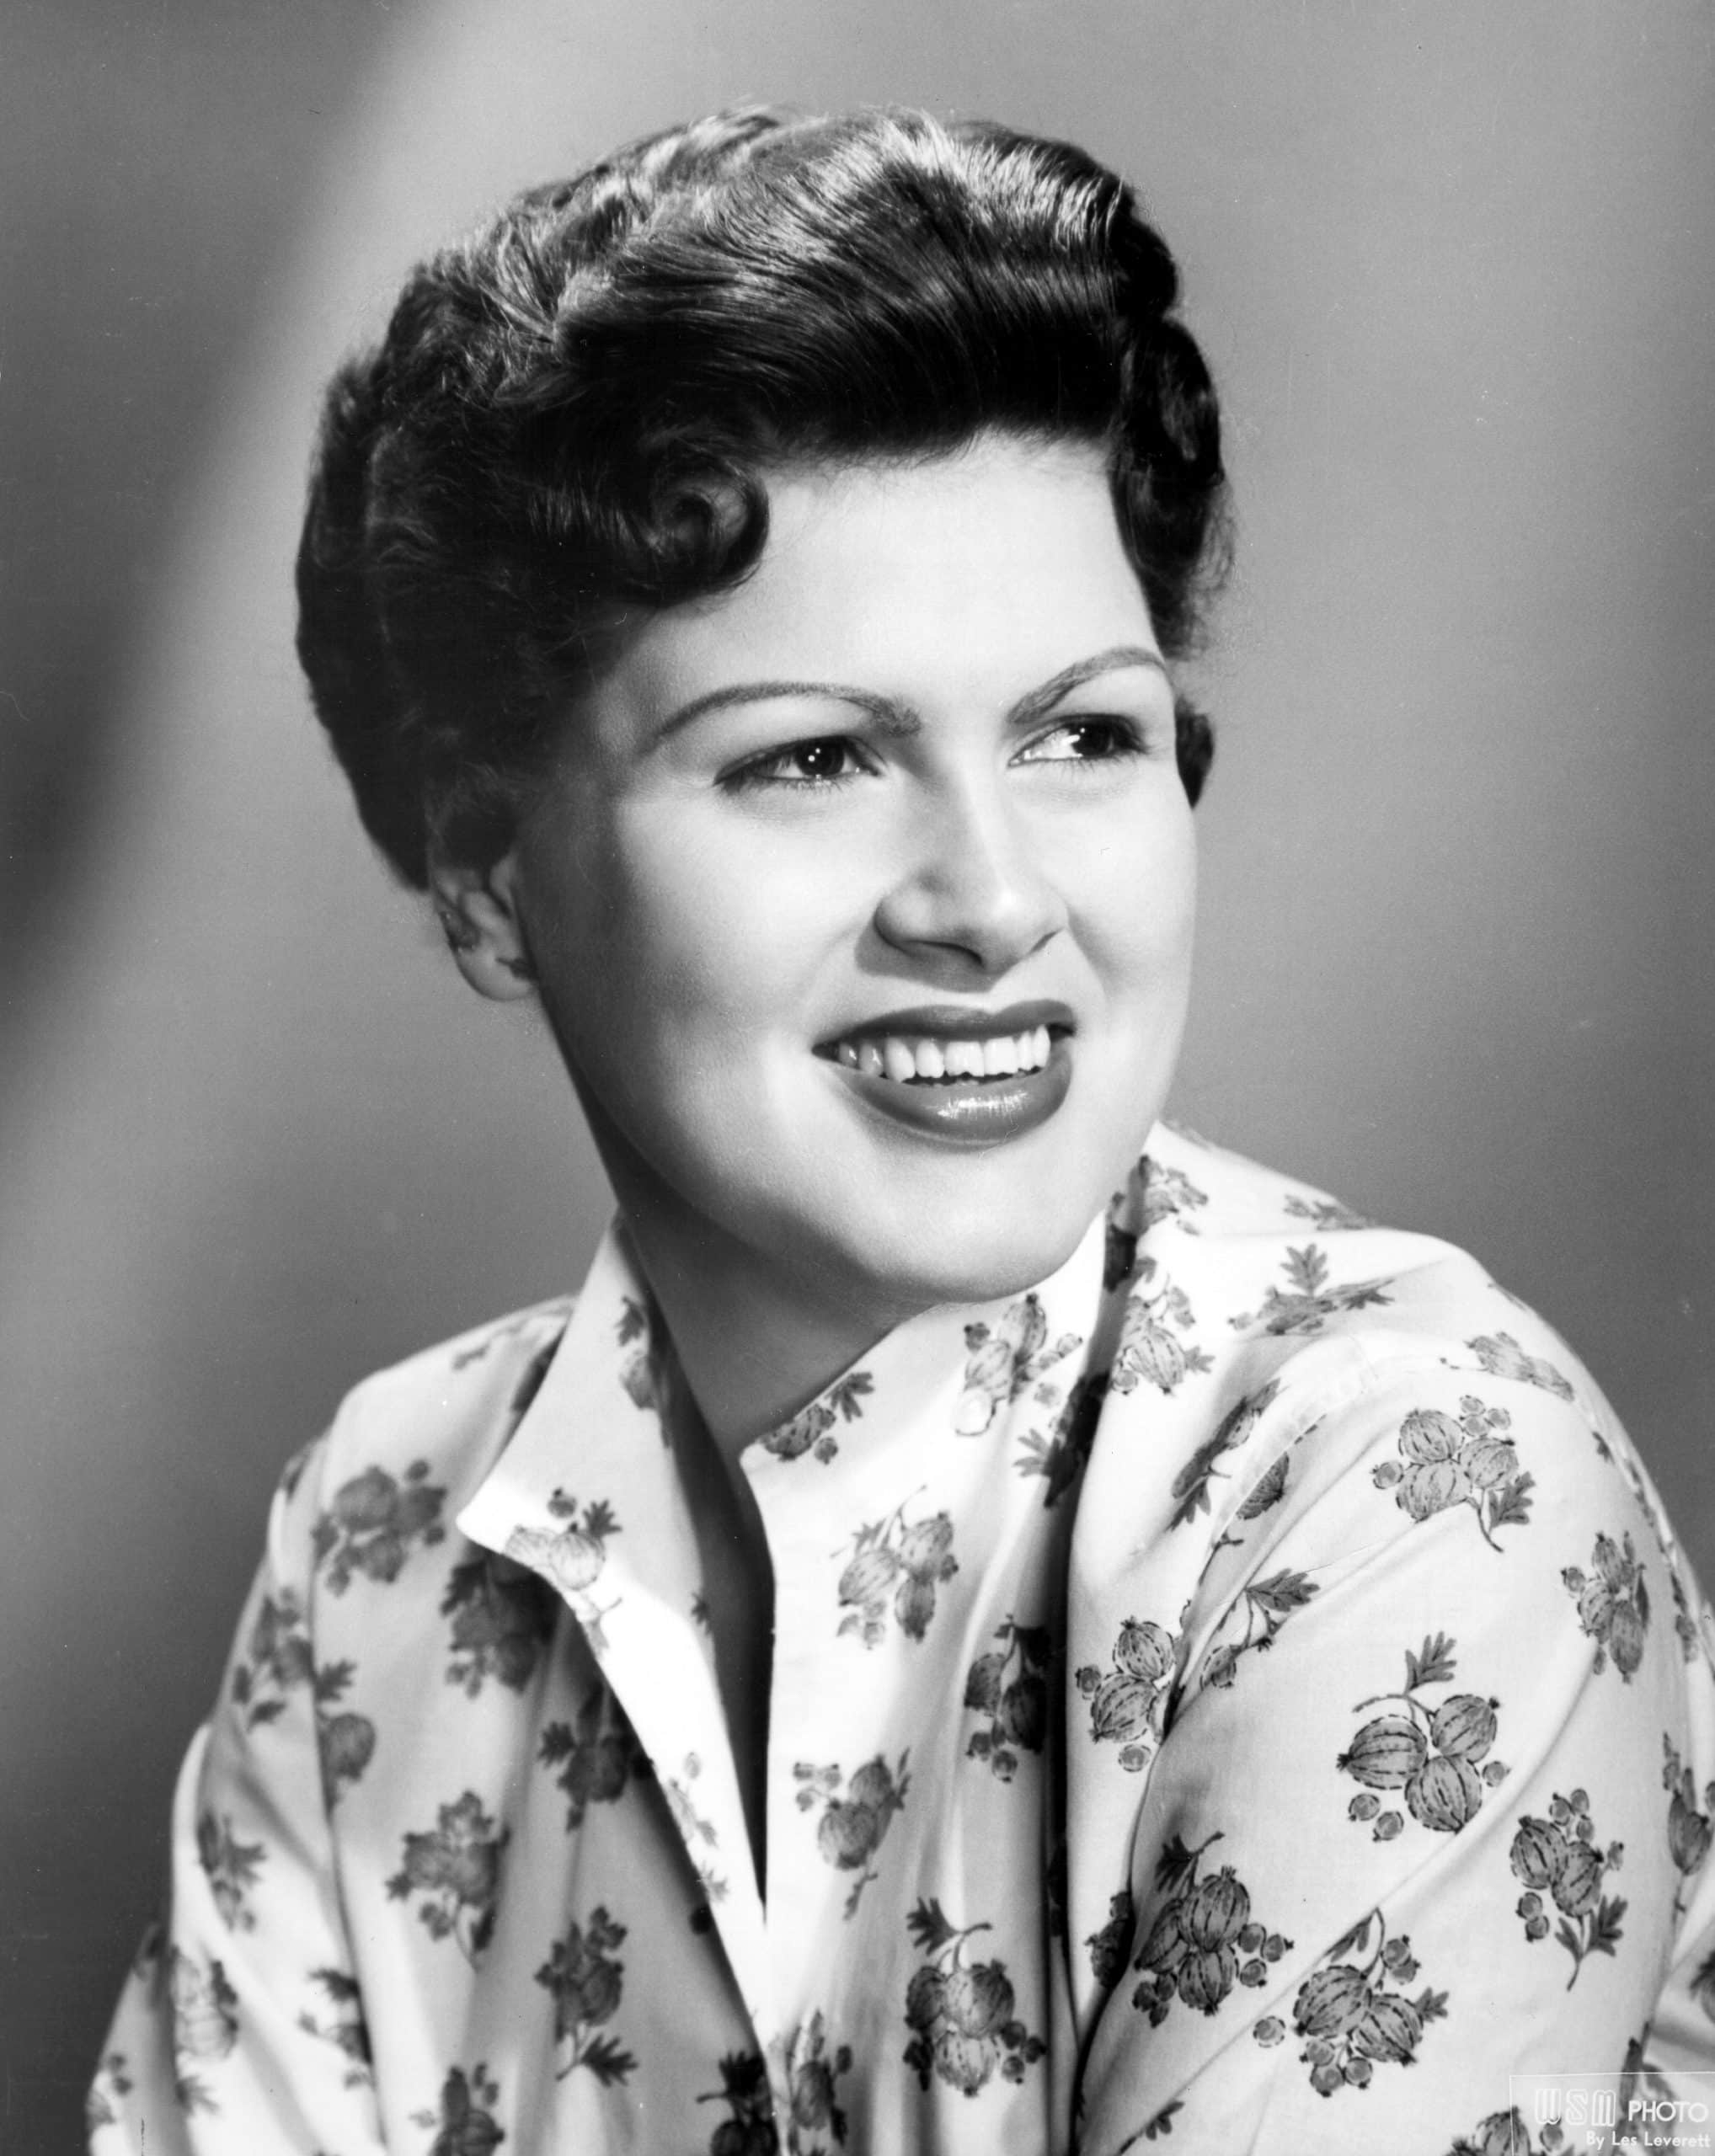 A portrait of Patsy Cline. LeAnn Rimes performed a tribute to her at a past awards show.